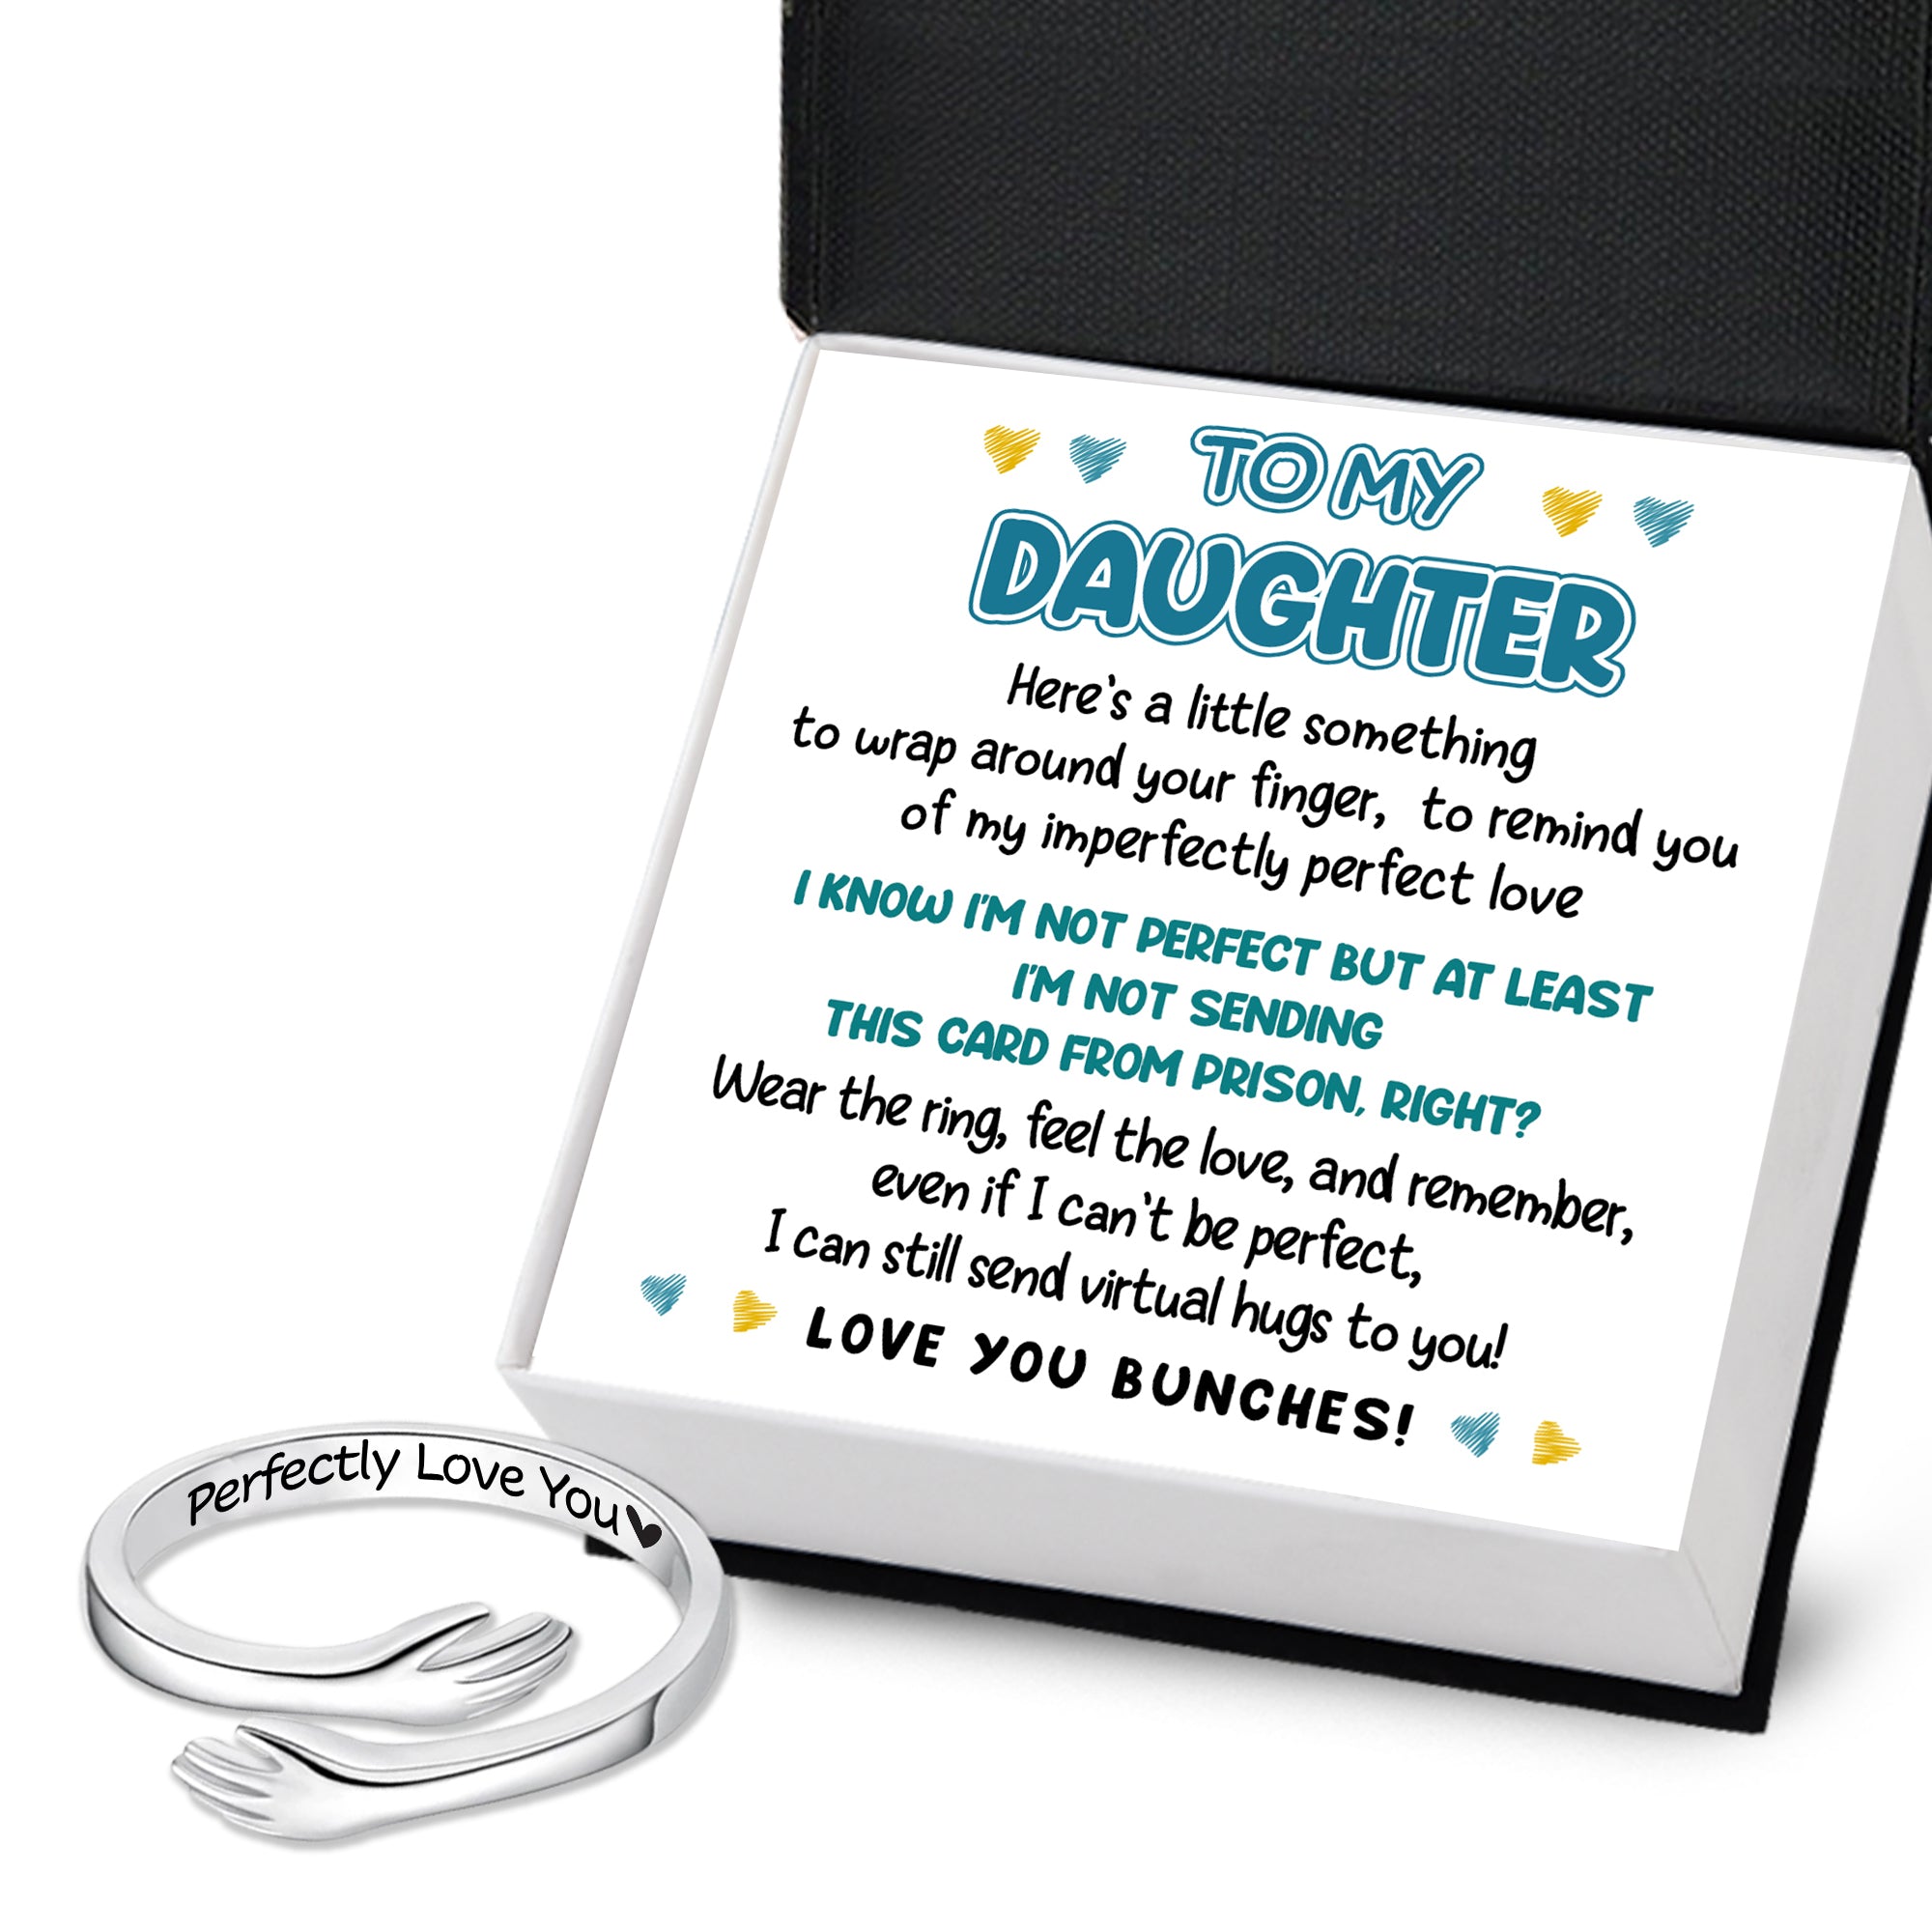 Wrapping Love & Laughs With Hug Ring To Make Your Daughter Chuckle With Every Squeeze - Gyk17011